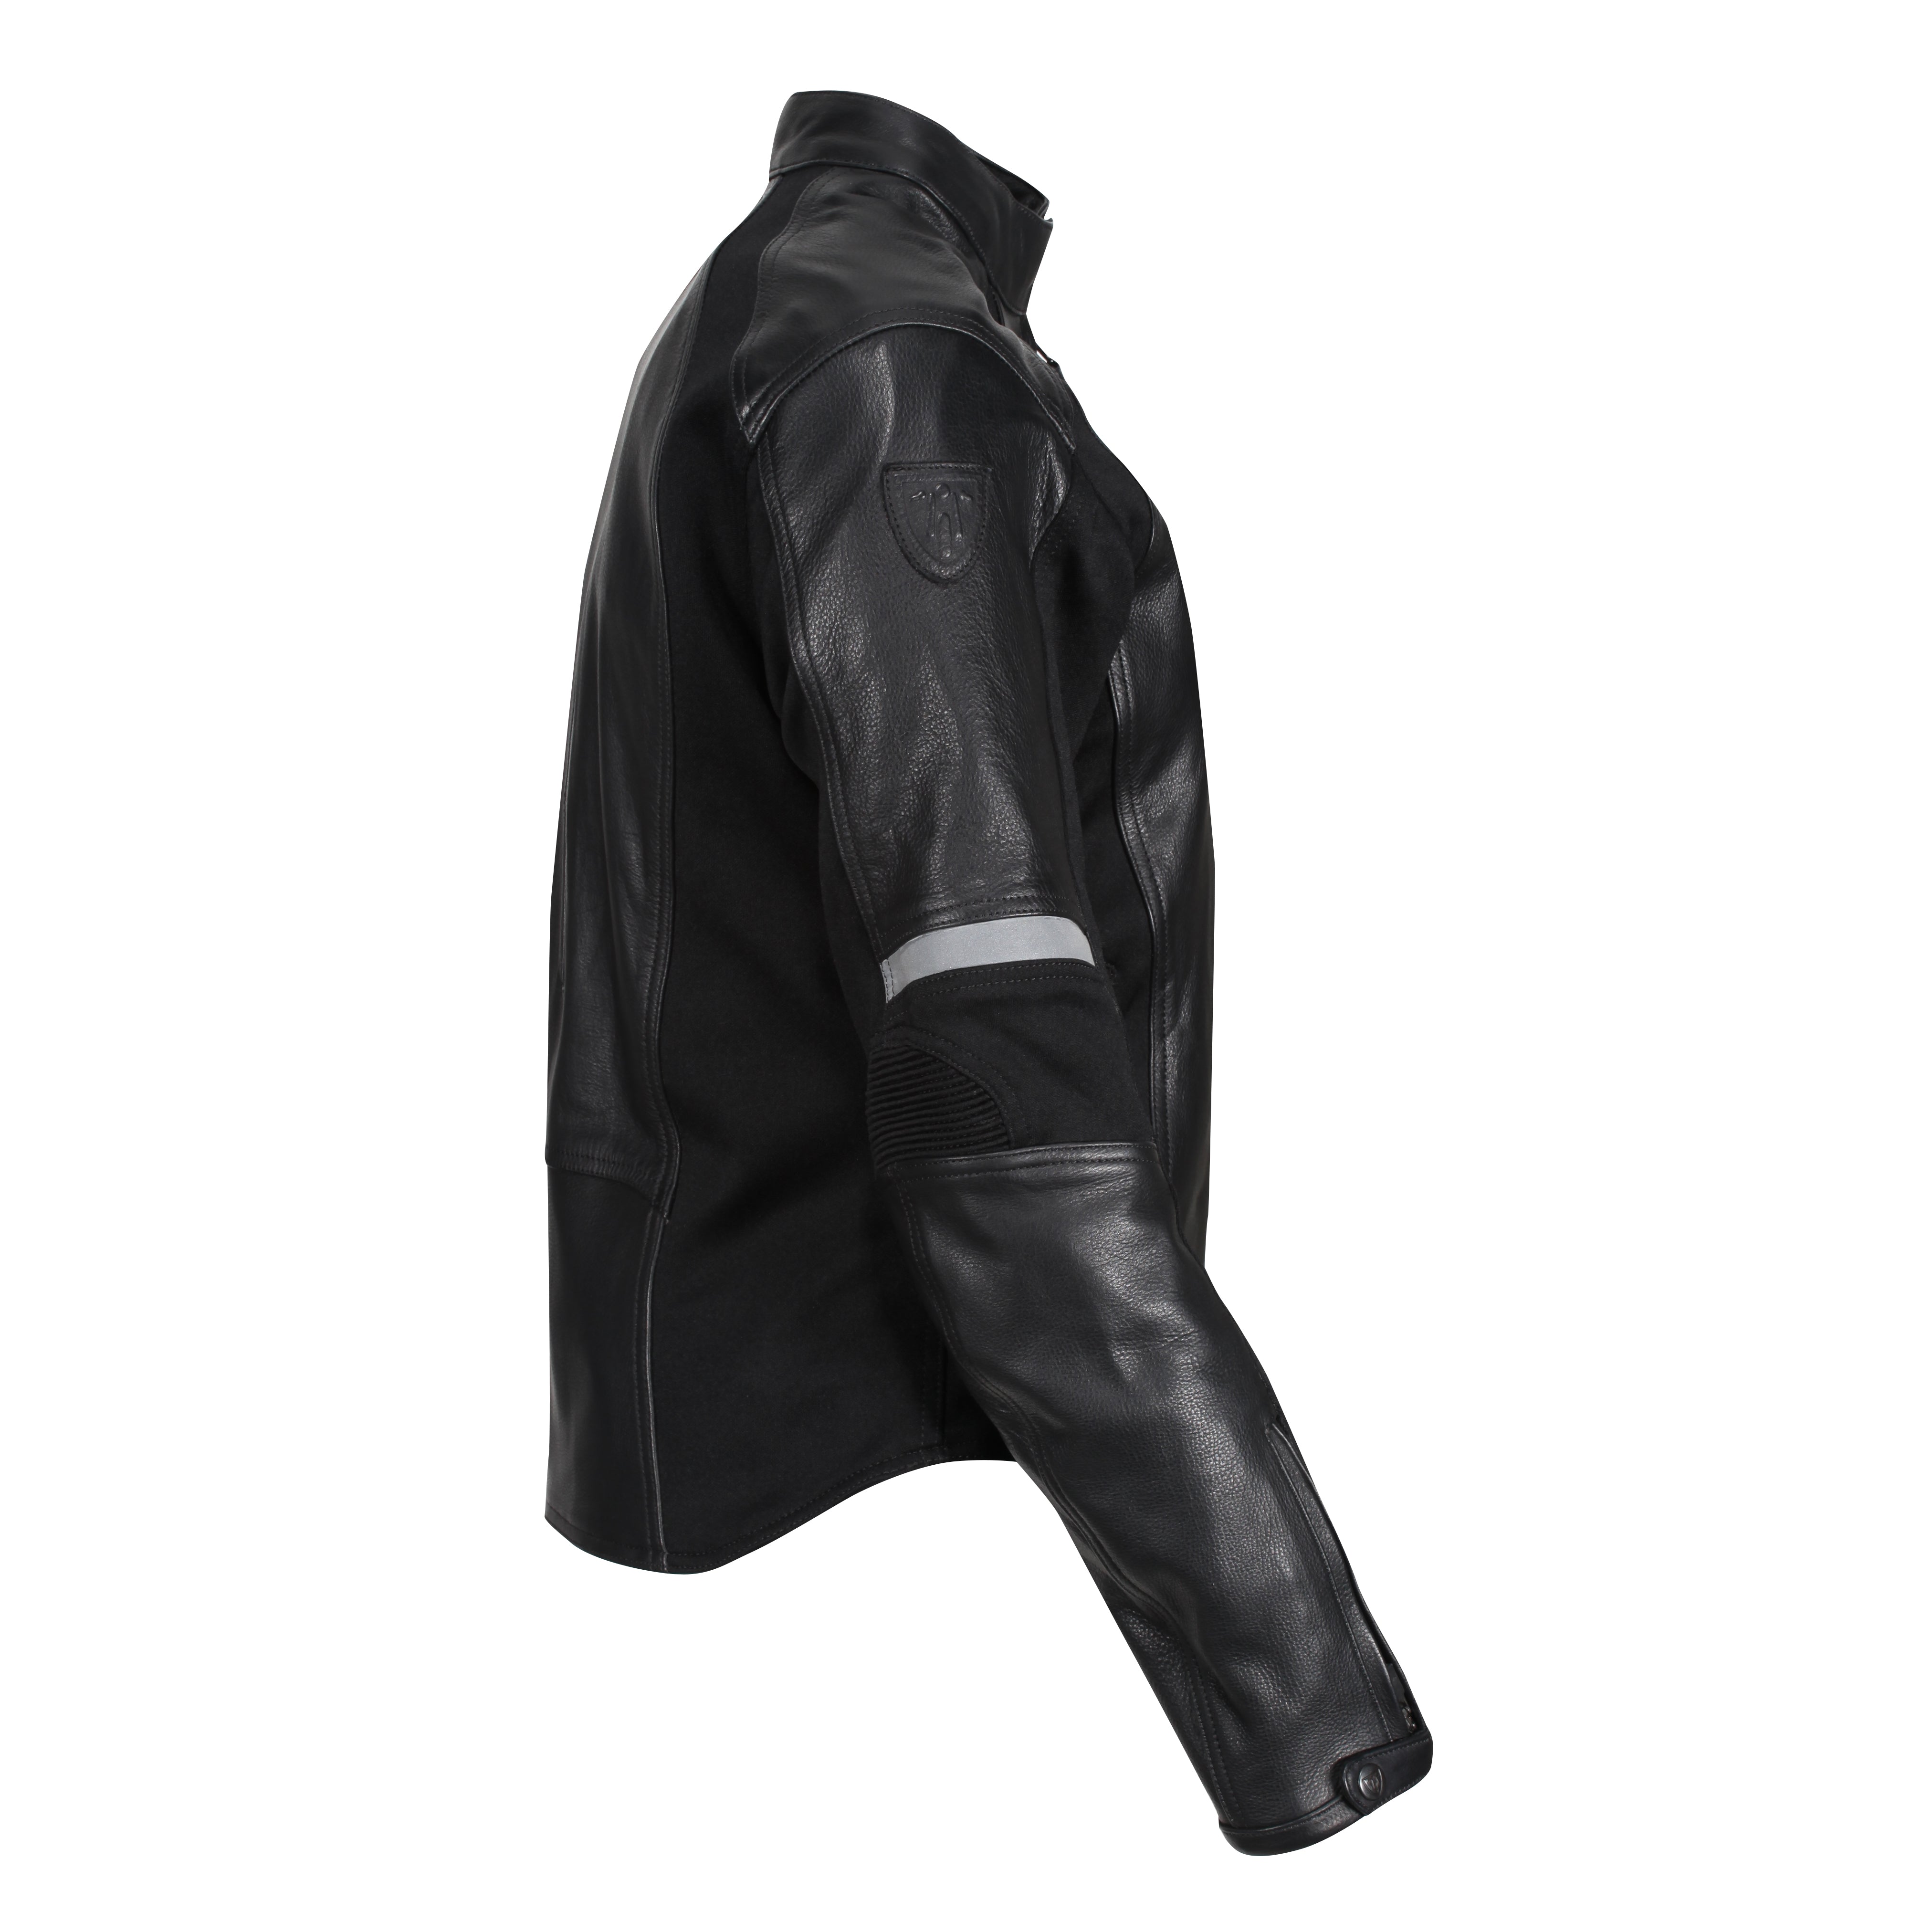 The side of Black leather women&#39;s motorcycle jacket with reflectors from Moto Girl 